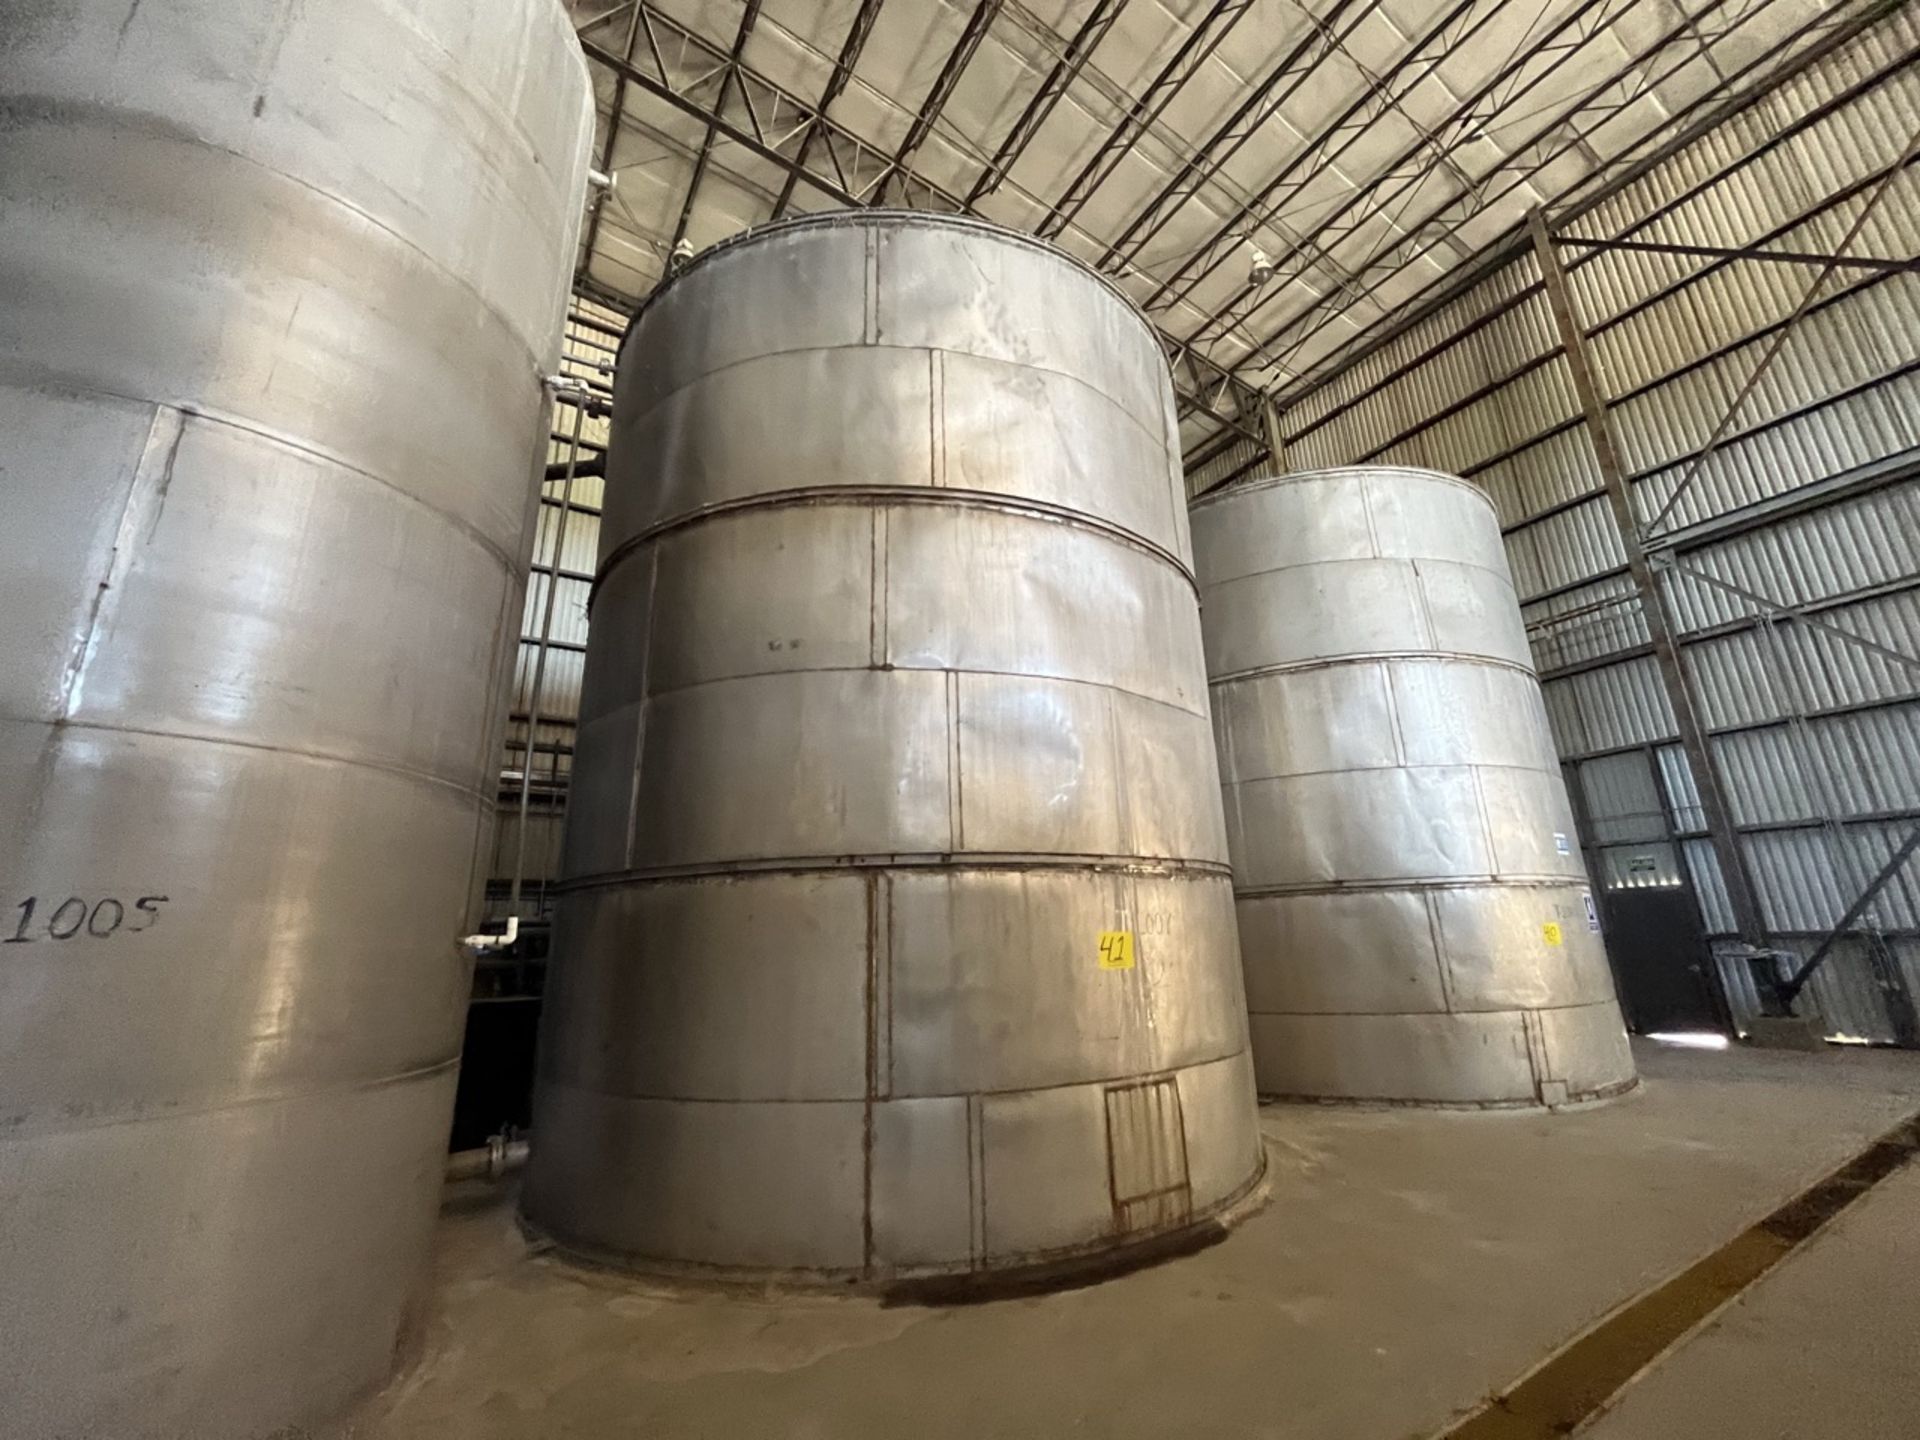 Stainless steel storage tank with a capacity of 192,163 liters, measuring approximately 6 meters in - Bild 3 aus 9